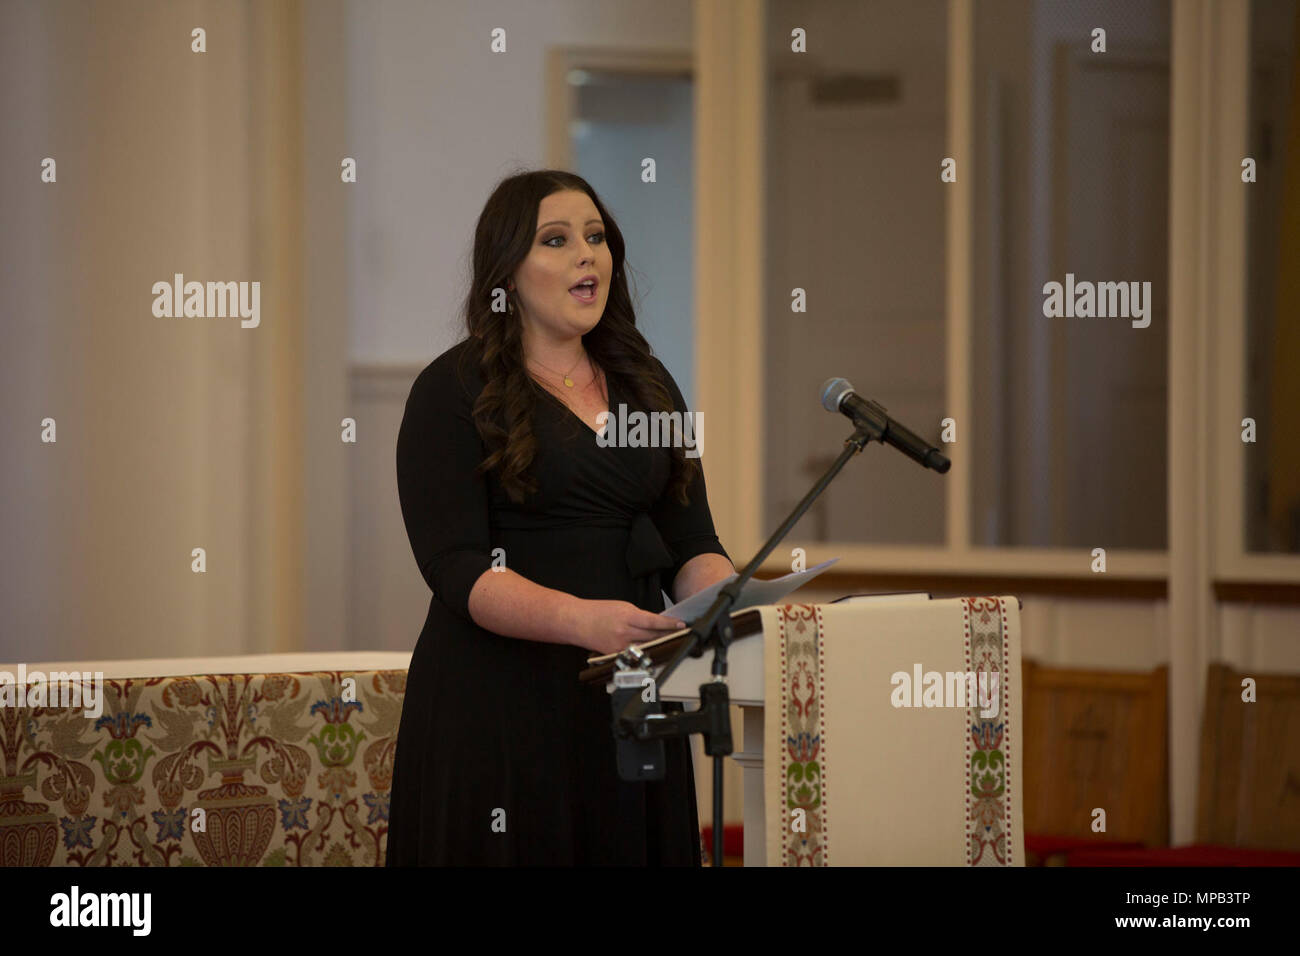 Kailee Kakazu, granddaughter of retired U.S. Marine Corps Lt. Gen. Lawrence F. Snowden, sings during her grandfather’s memorial service at the U.S. Marine Memorial Chapel, Quantico, Va., April 8, 2017. His father retired in 1979 after nearly 40 years of service, fought in engagements during World War II, the Korean War, and Vietnam. He passed away Feb. 18, 2017. He was prominently known after retirement for organizing joint 'Reunion of Honor' missions which is an opportunity for Japanese and U.S. veterans and their families, dignitaries, leaders and service members from both nations to come to Stock Photo